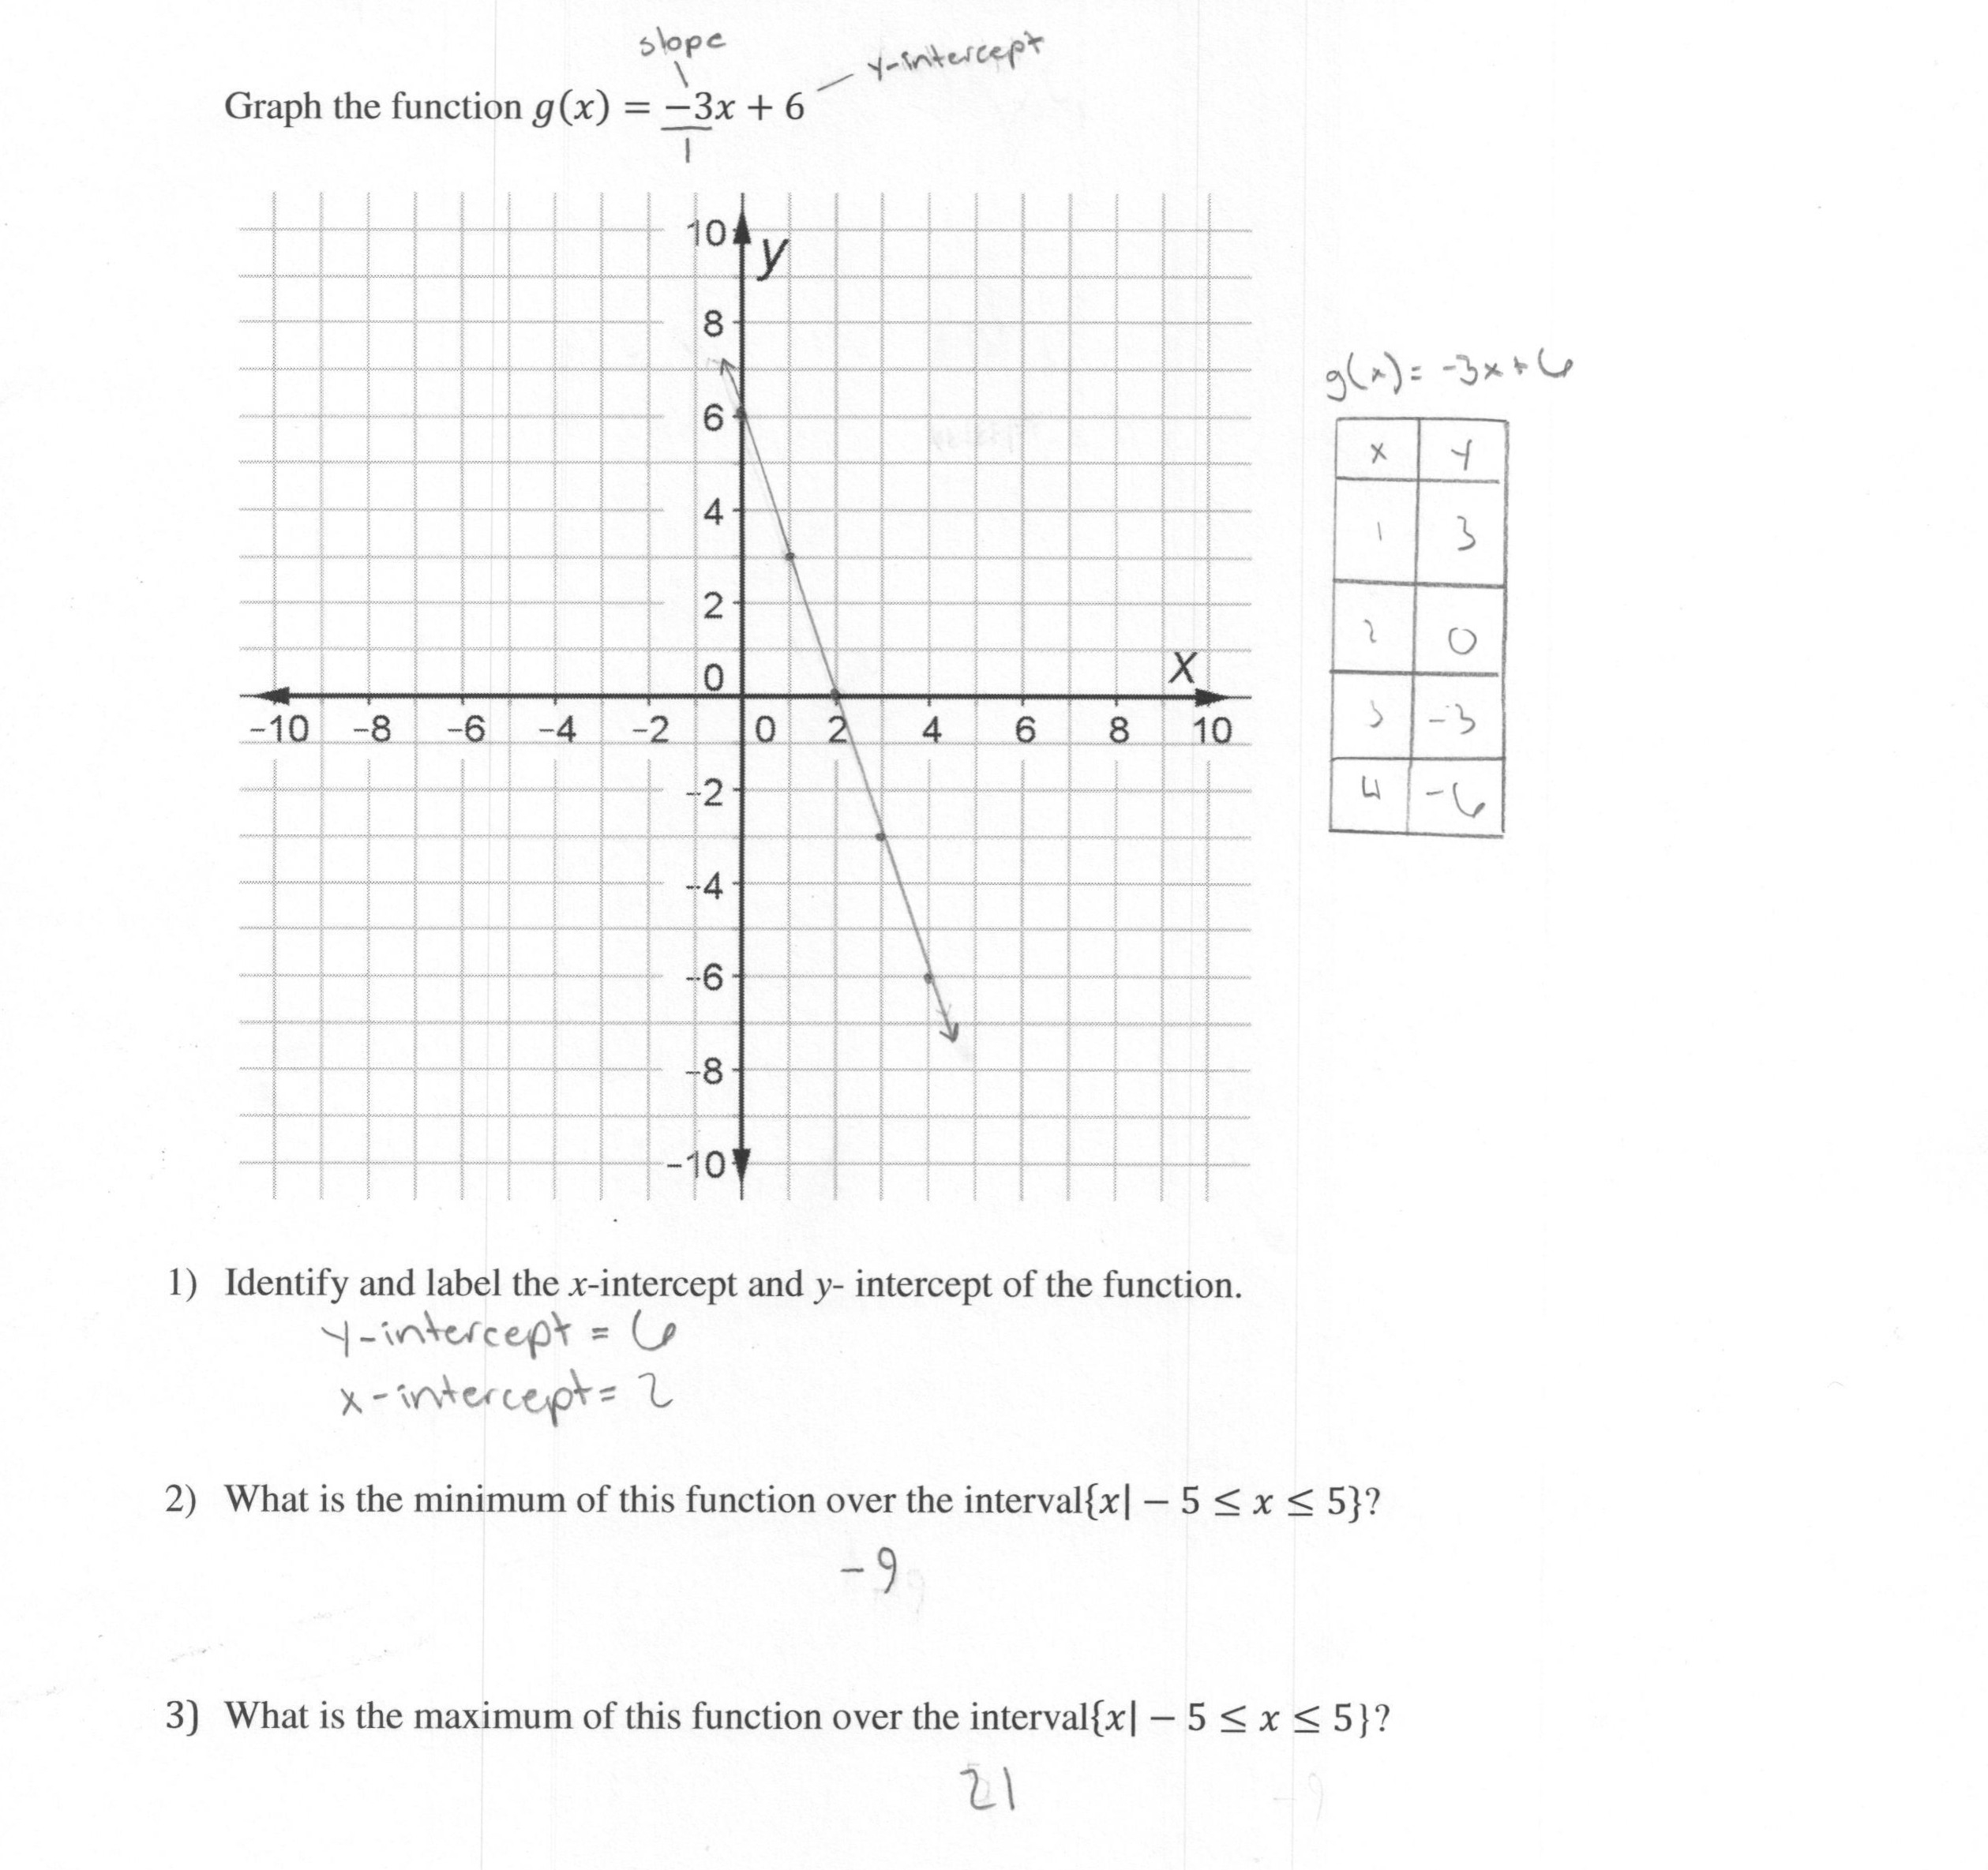 graphing-linear-functions-worksheet-answers-db-excel